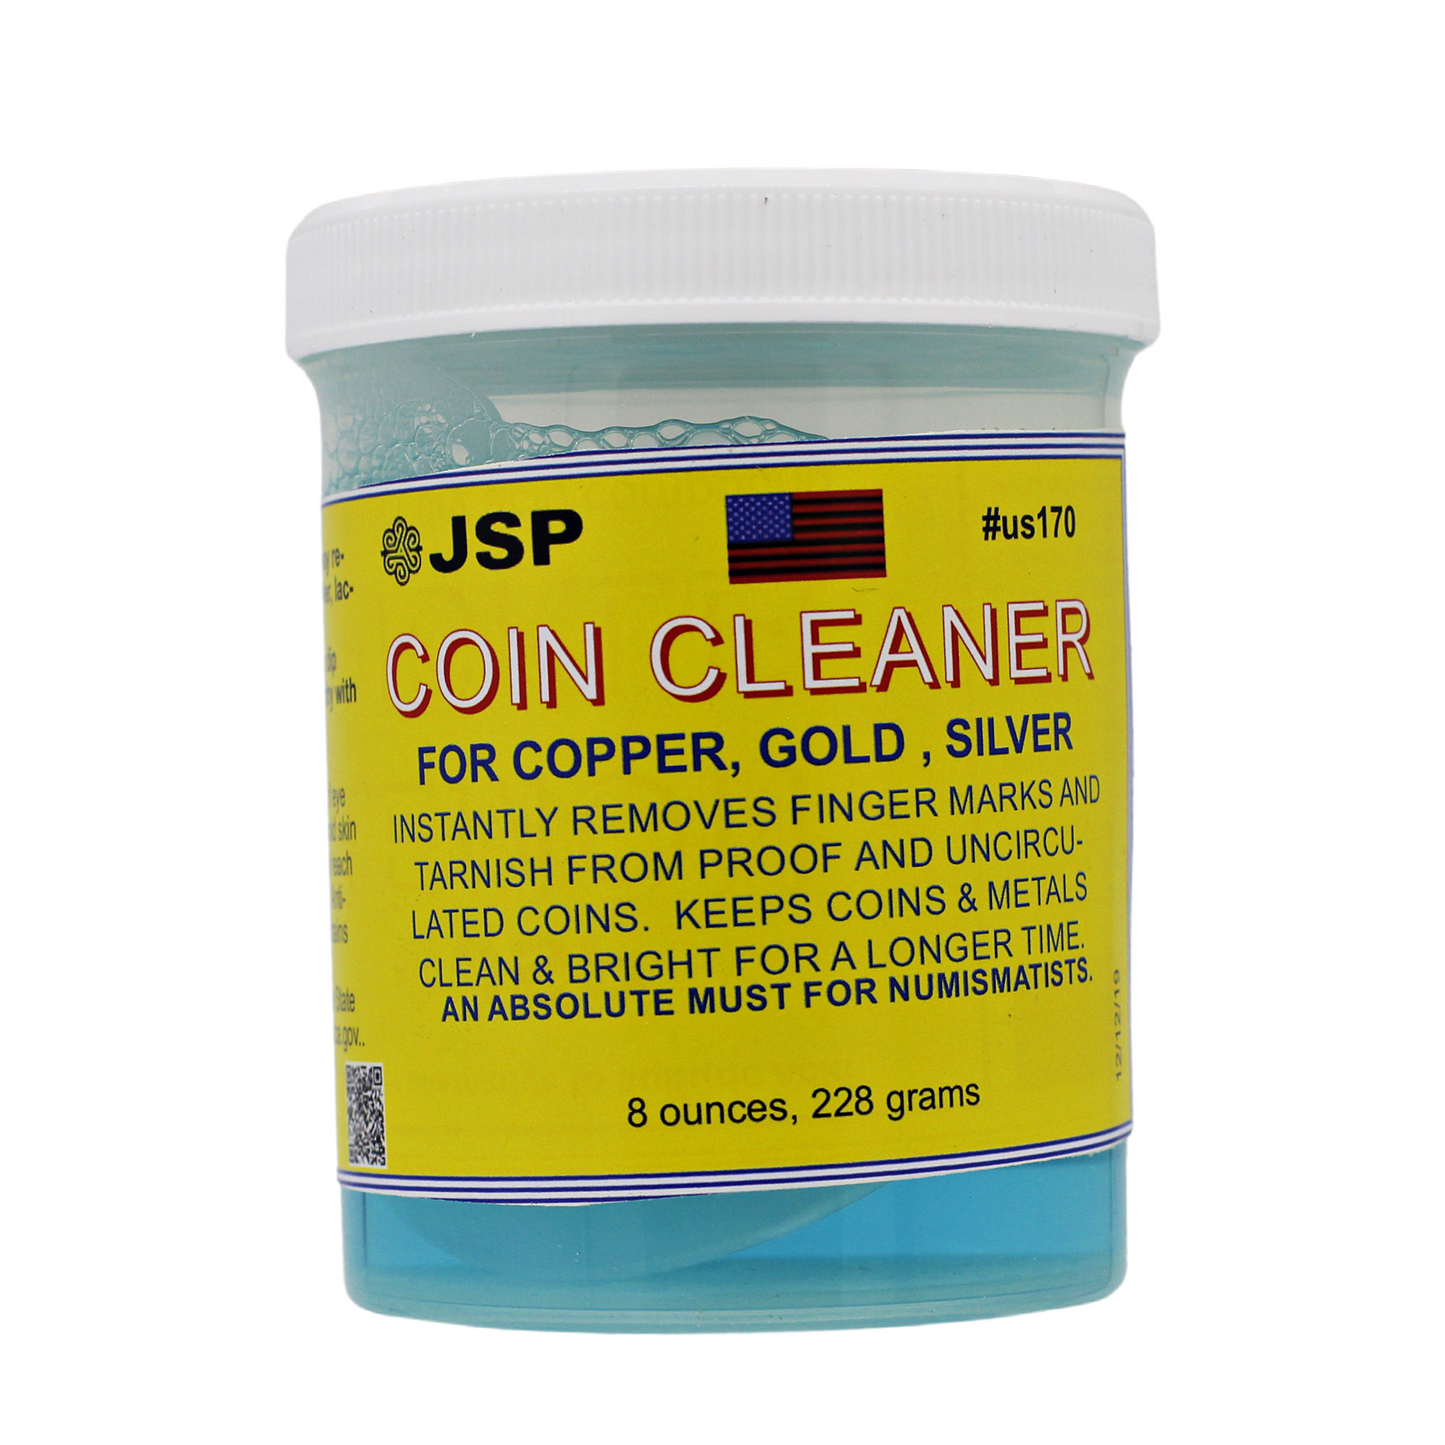 JSP Super Coin Cleaner 8 oz for Copper, Gold, Silver, & Platinum Precious Metals Jewelry Coins Bars